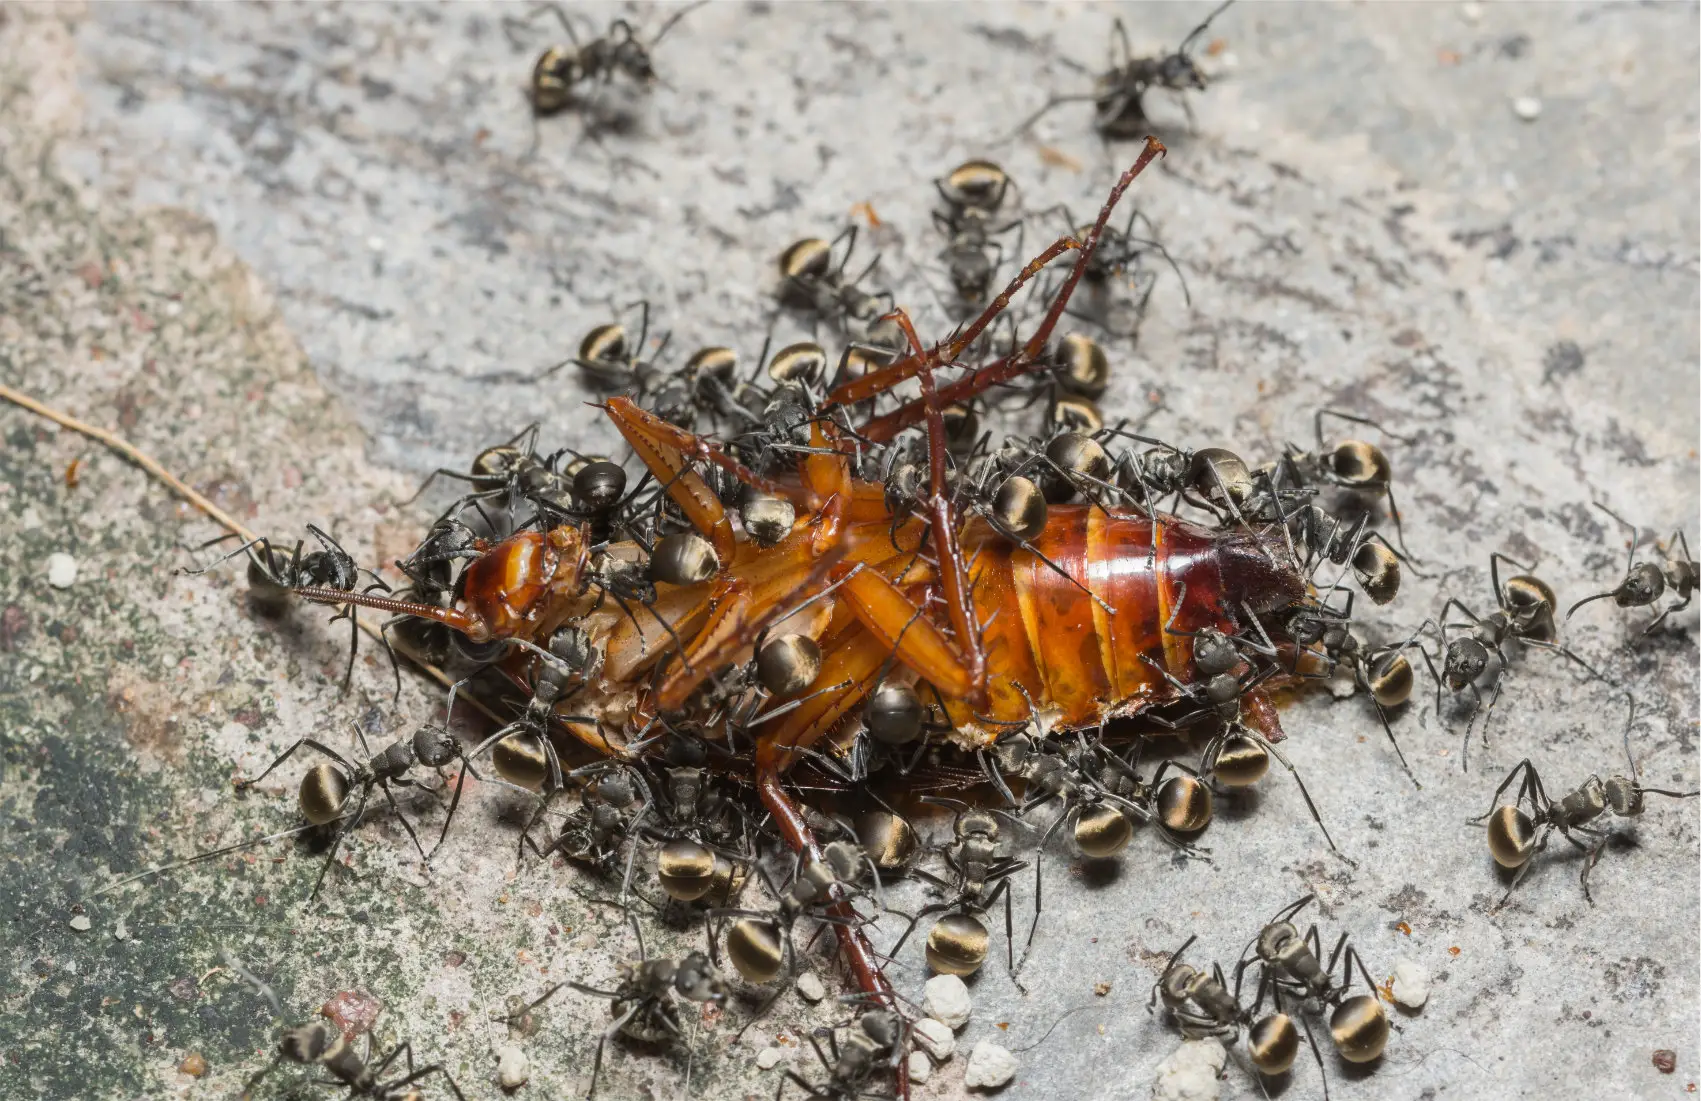 An image showing ants eating a dead cockroach